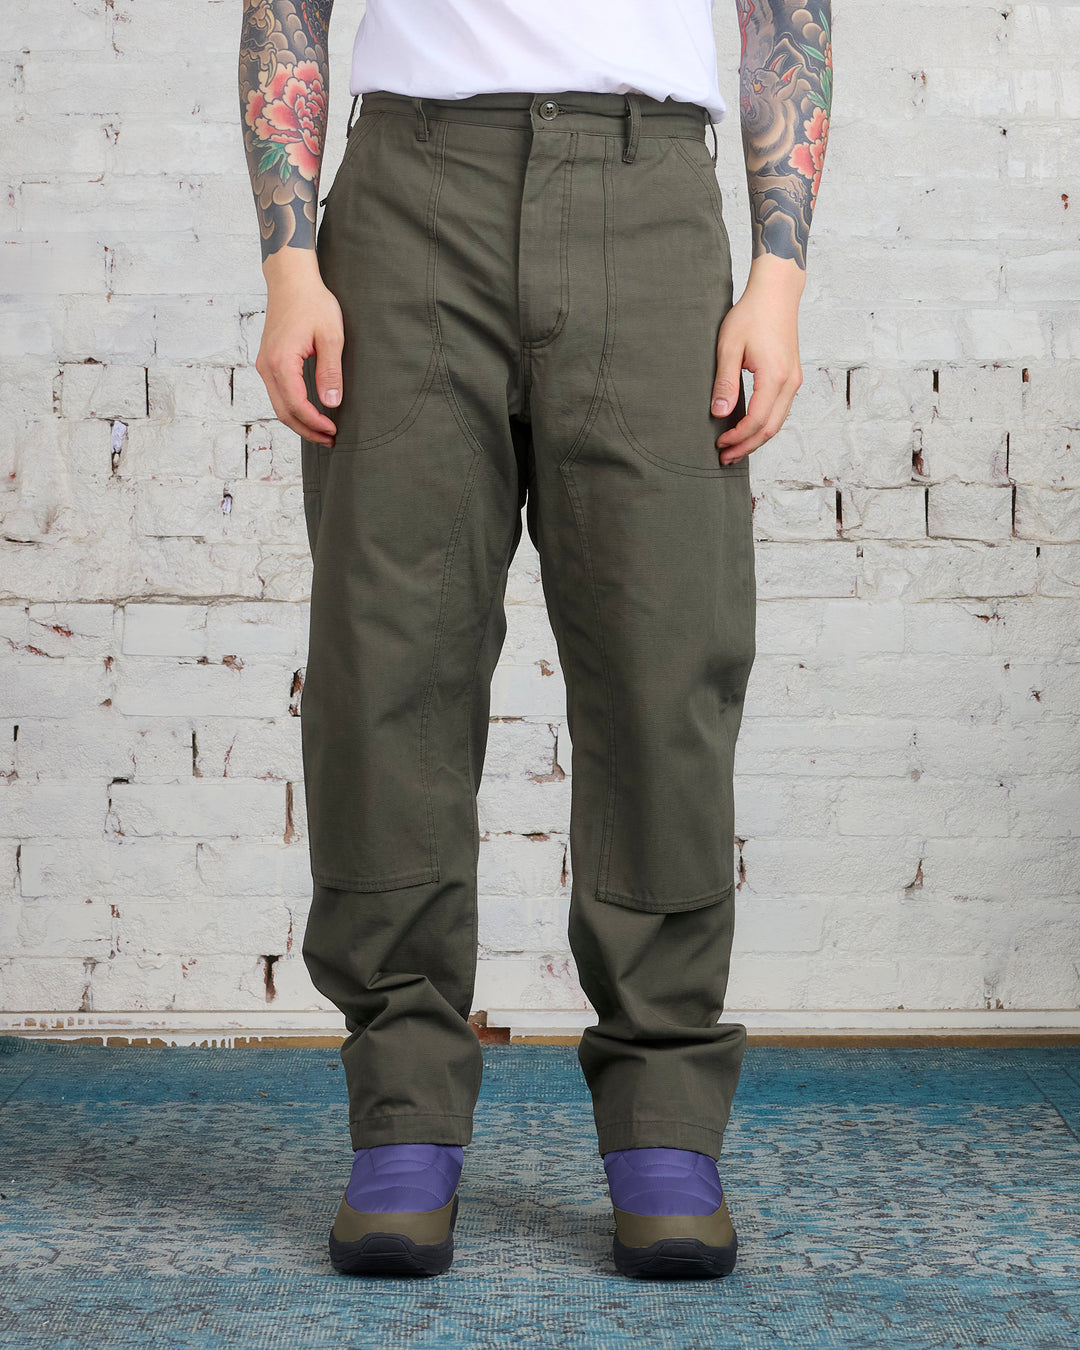 Engineered Garments Climbing Pant Olive Heavy Cotton Ripstop – LESS 17